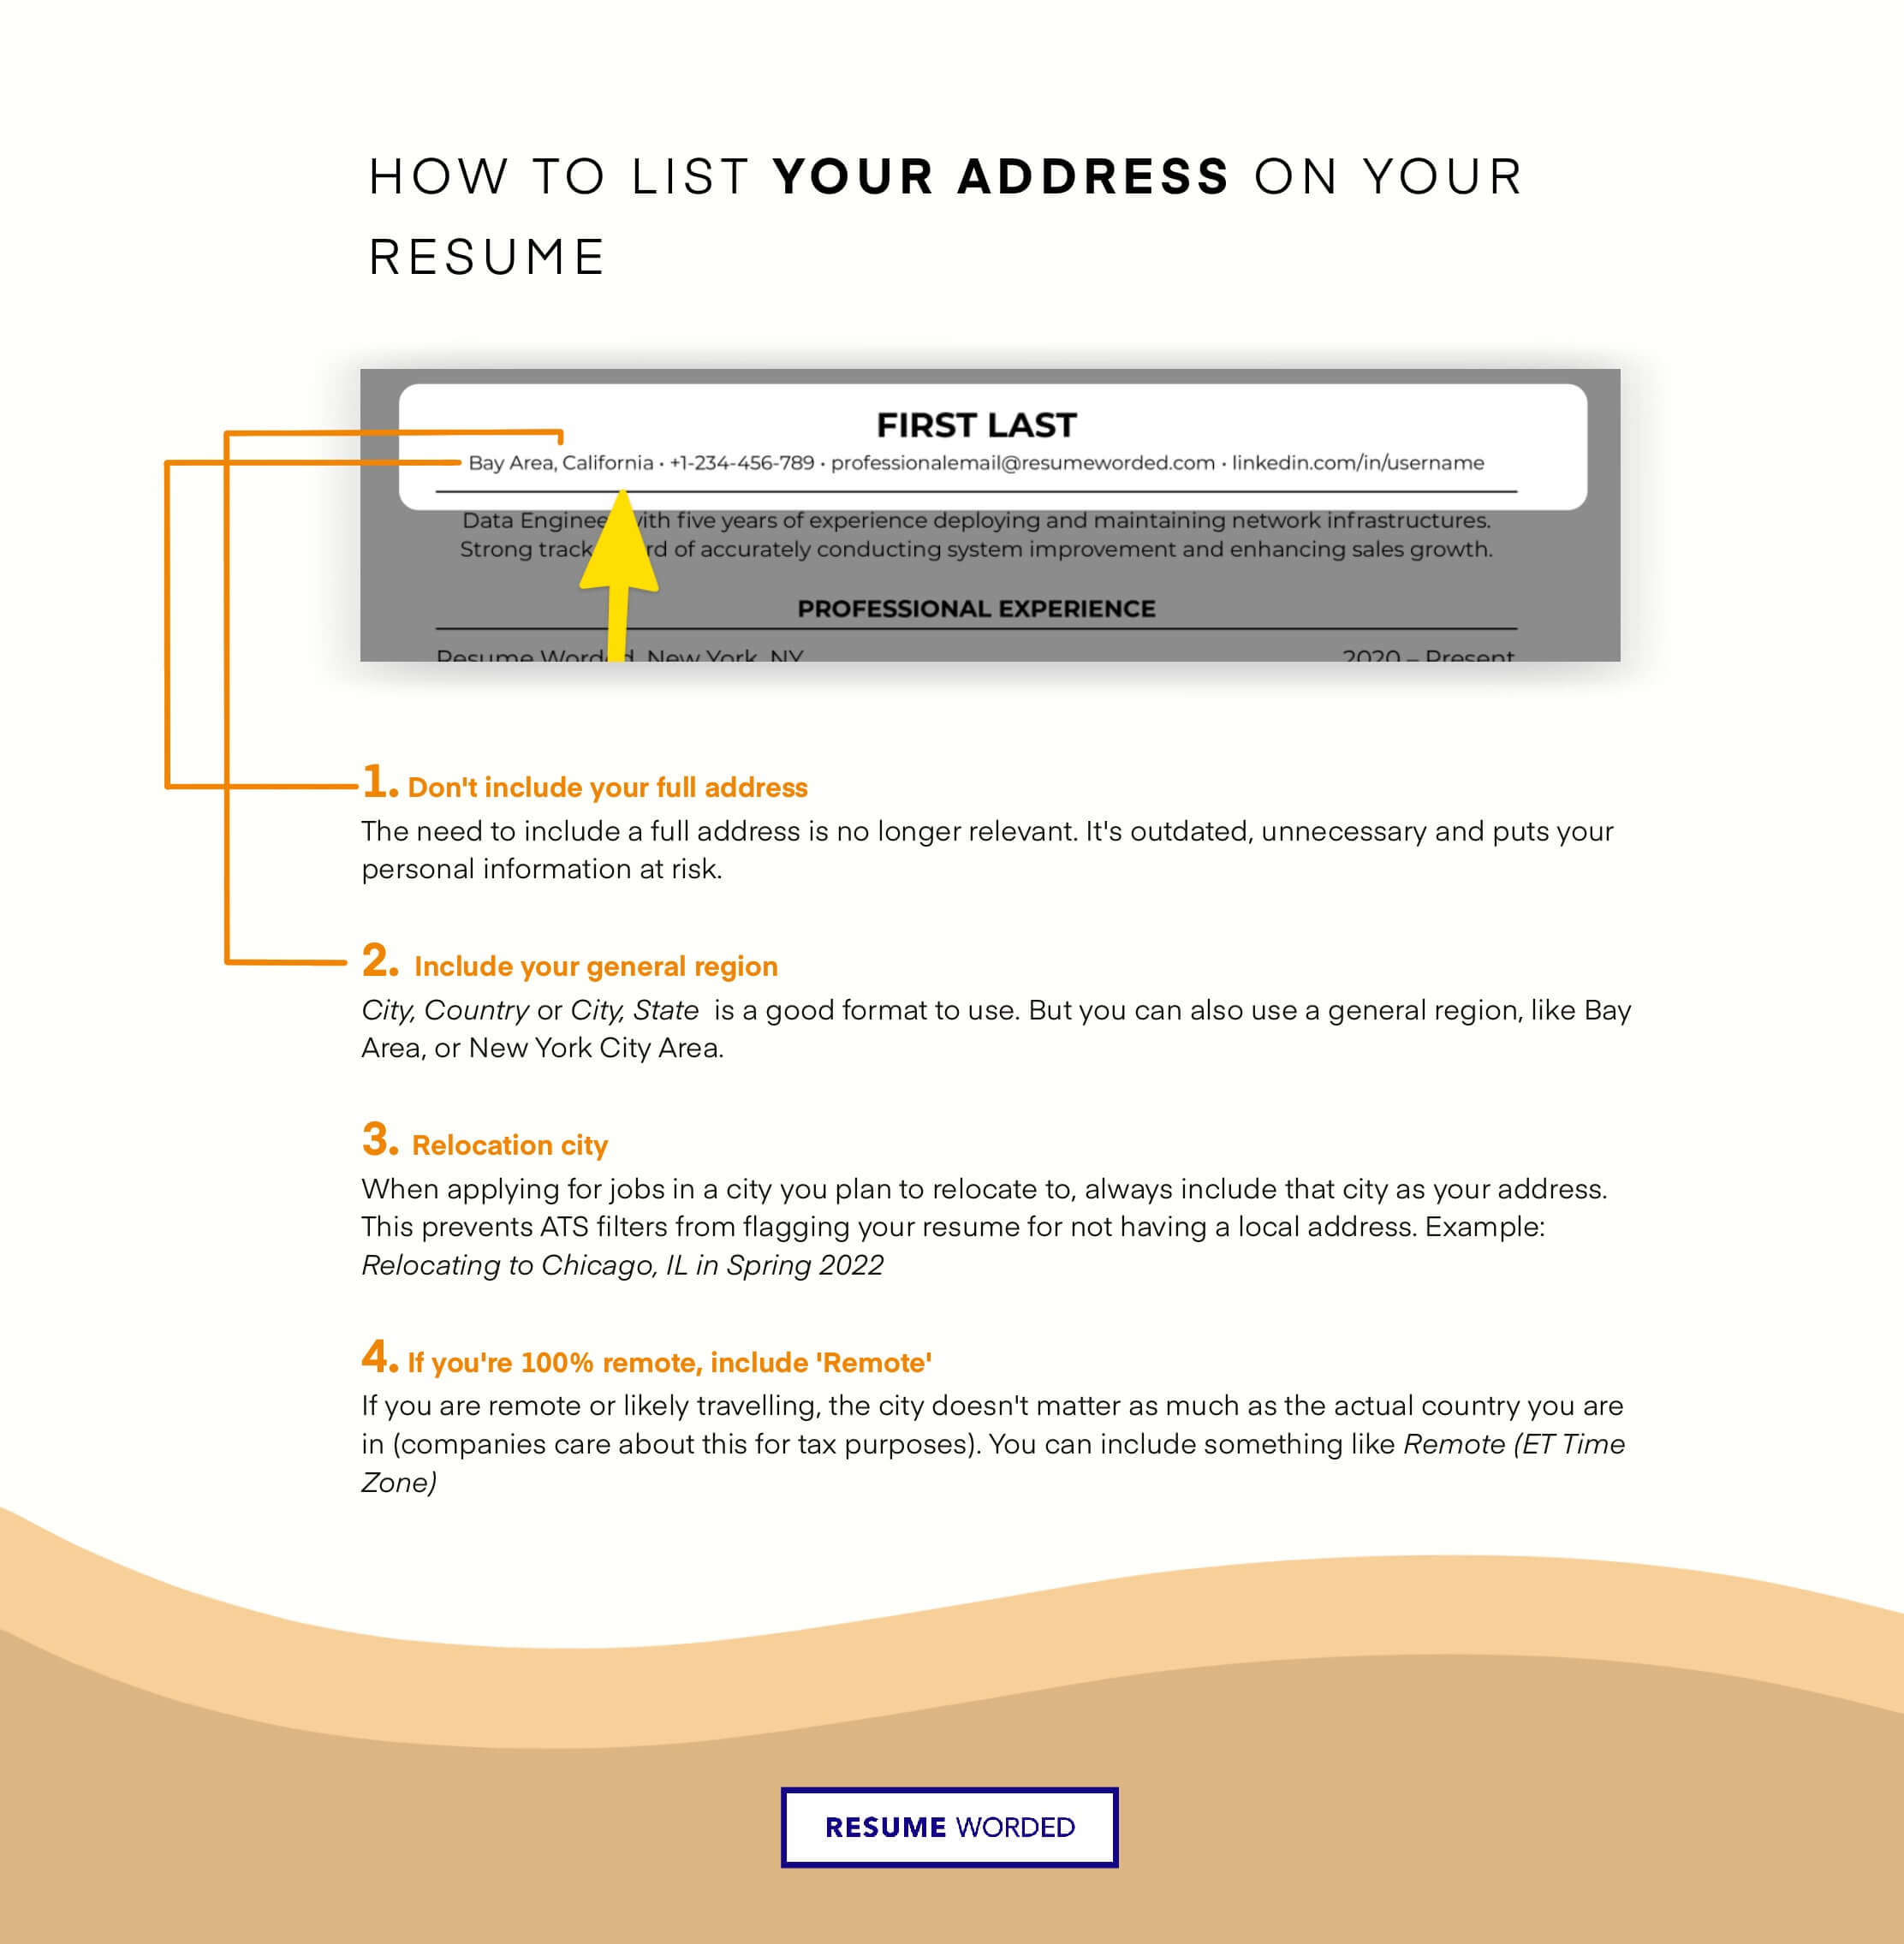 How to list your address on your resume